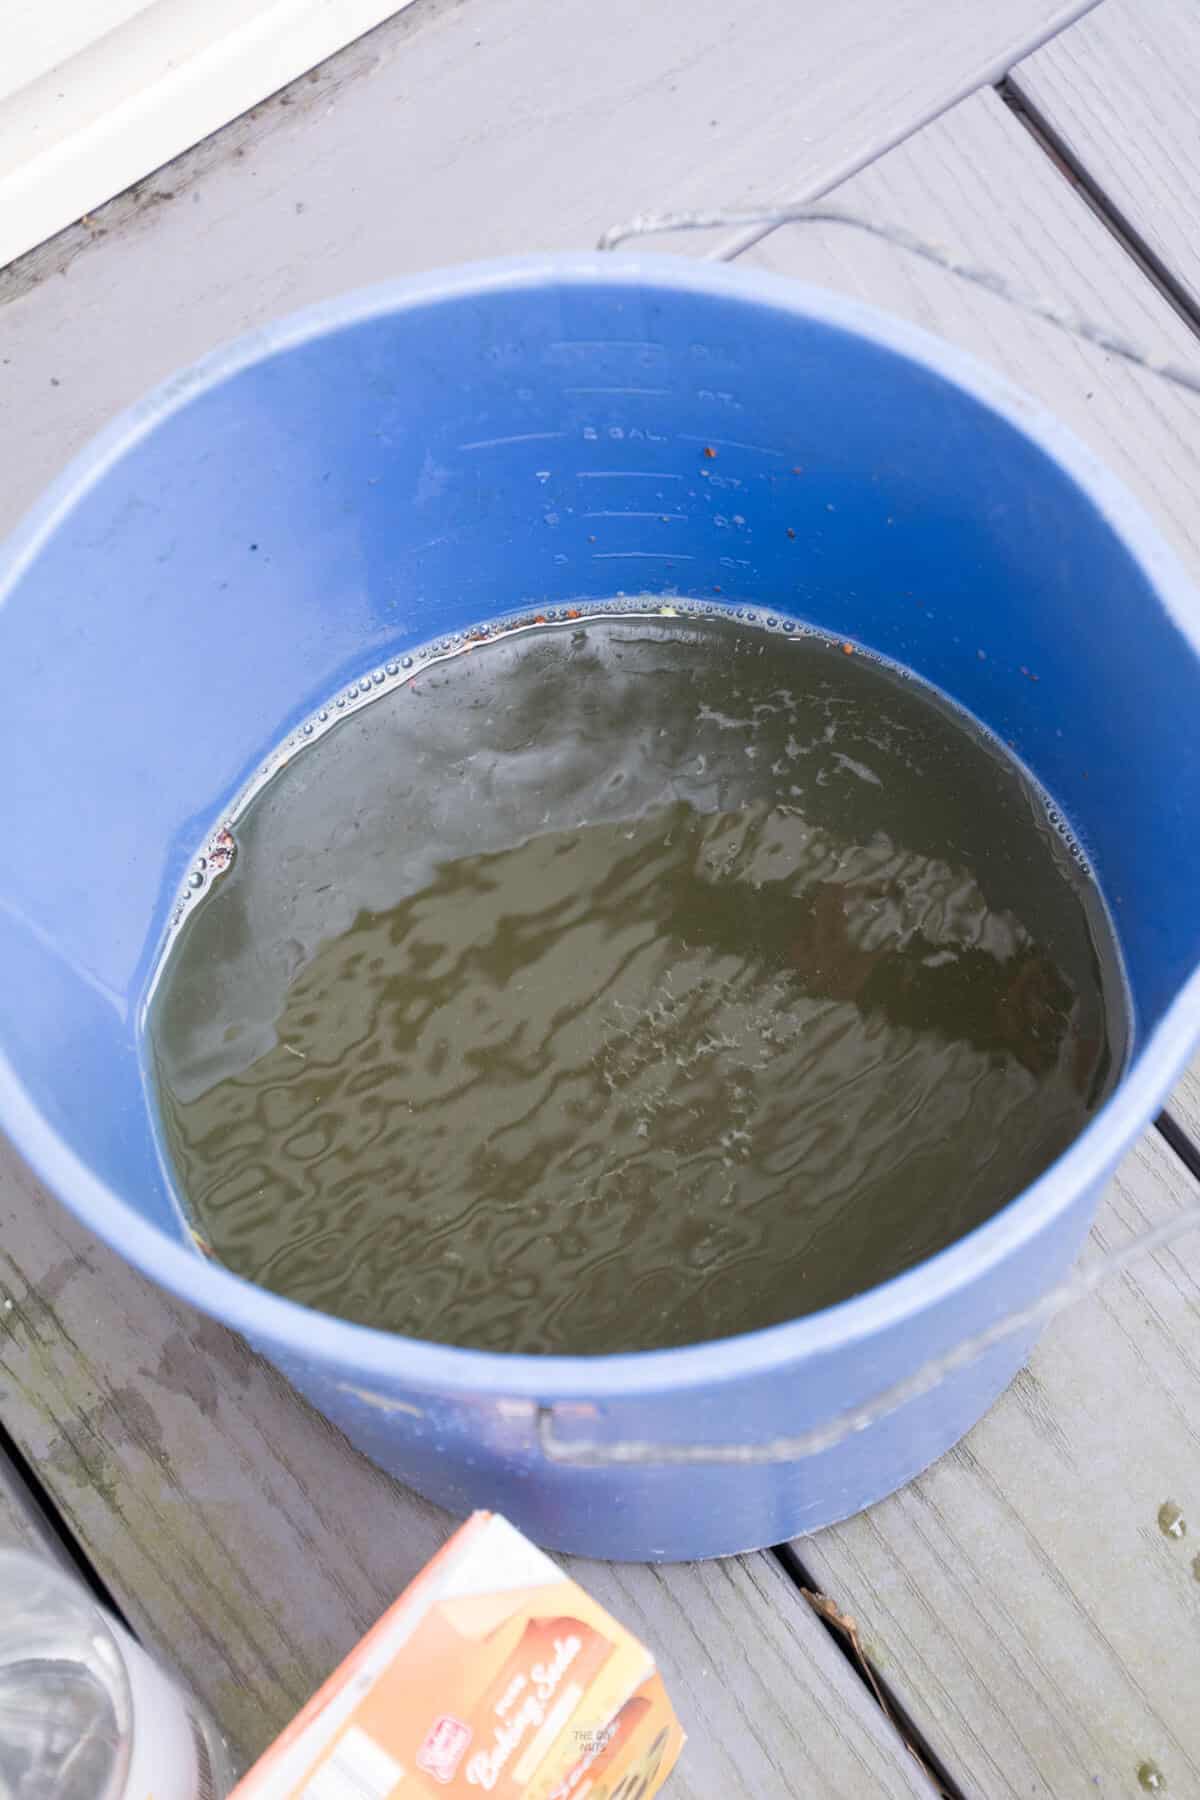 bucket filled with mildew after DIY cleaning used.